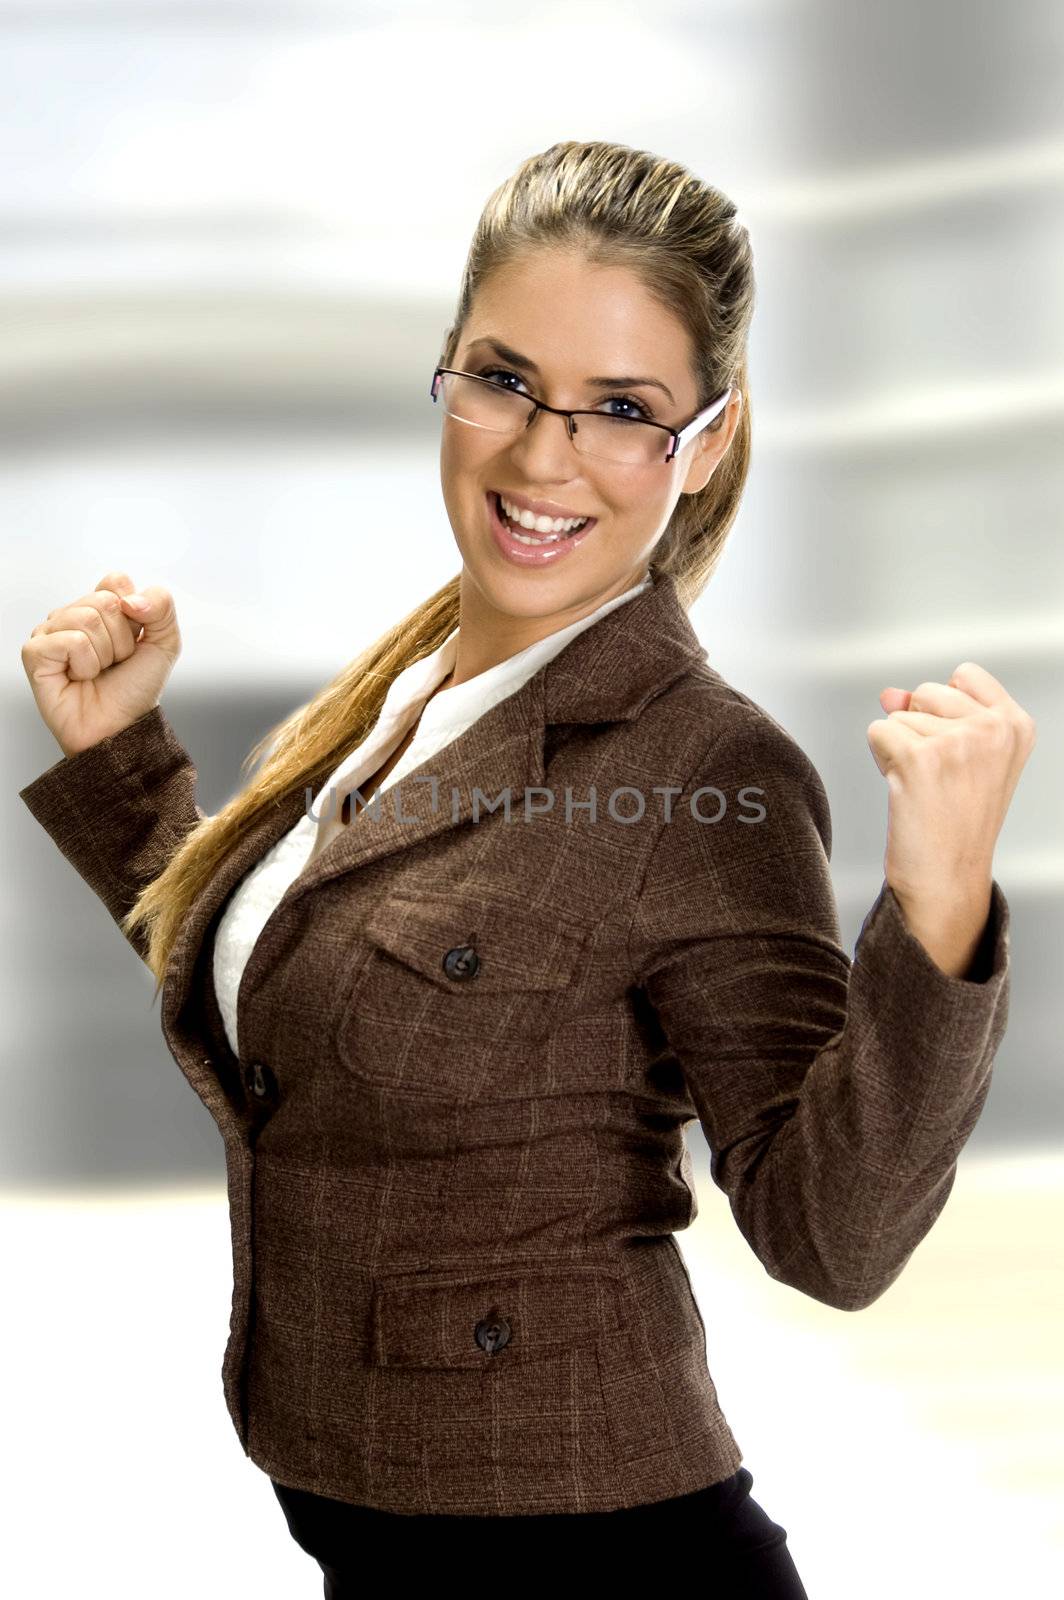 woman smiling and enjoying in happiness of success on an abstract background